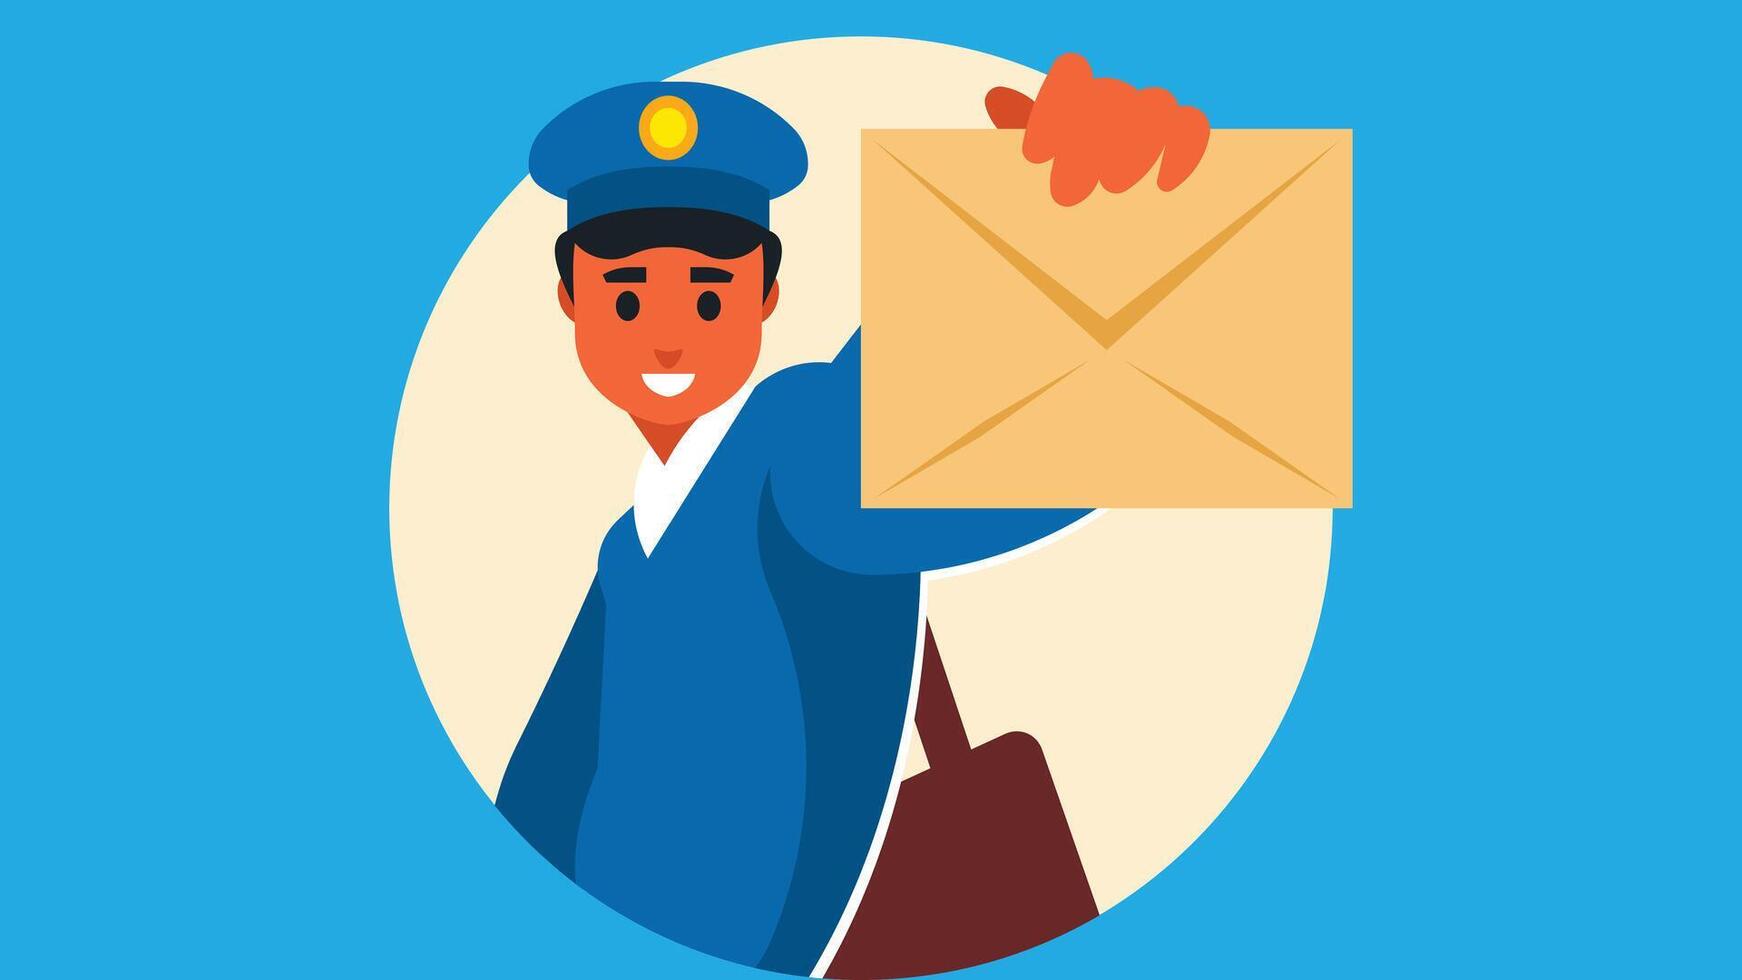 Postman delivering mail to a mailbox illustration vector